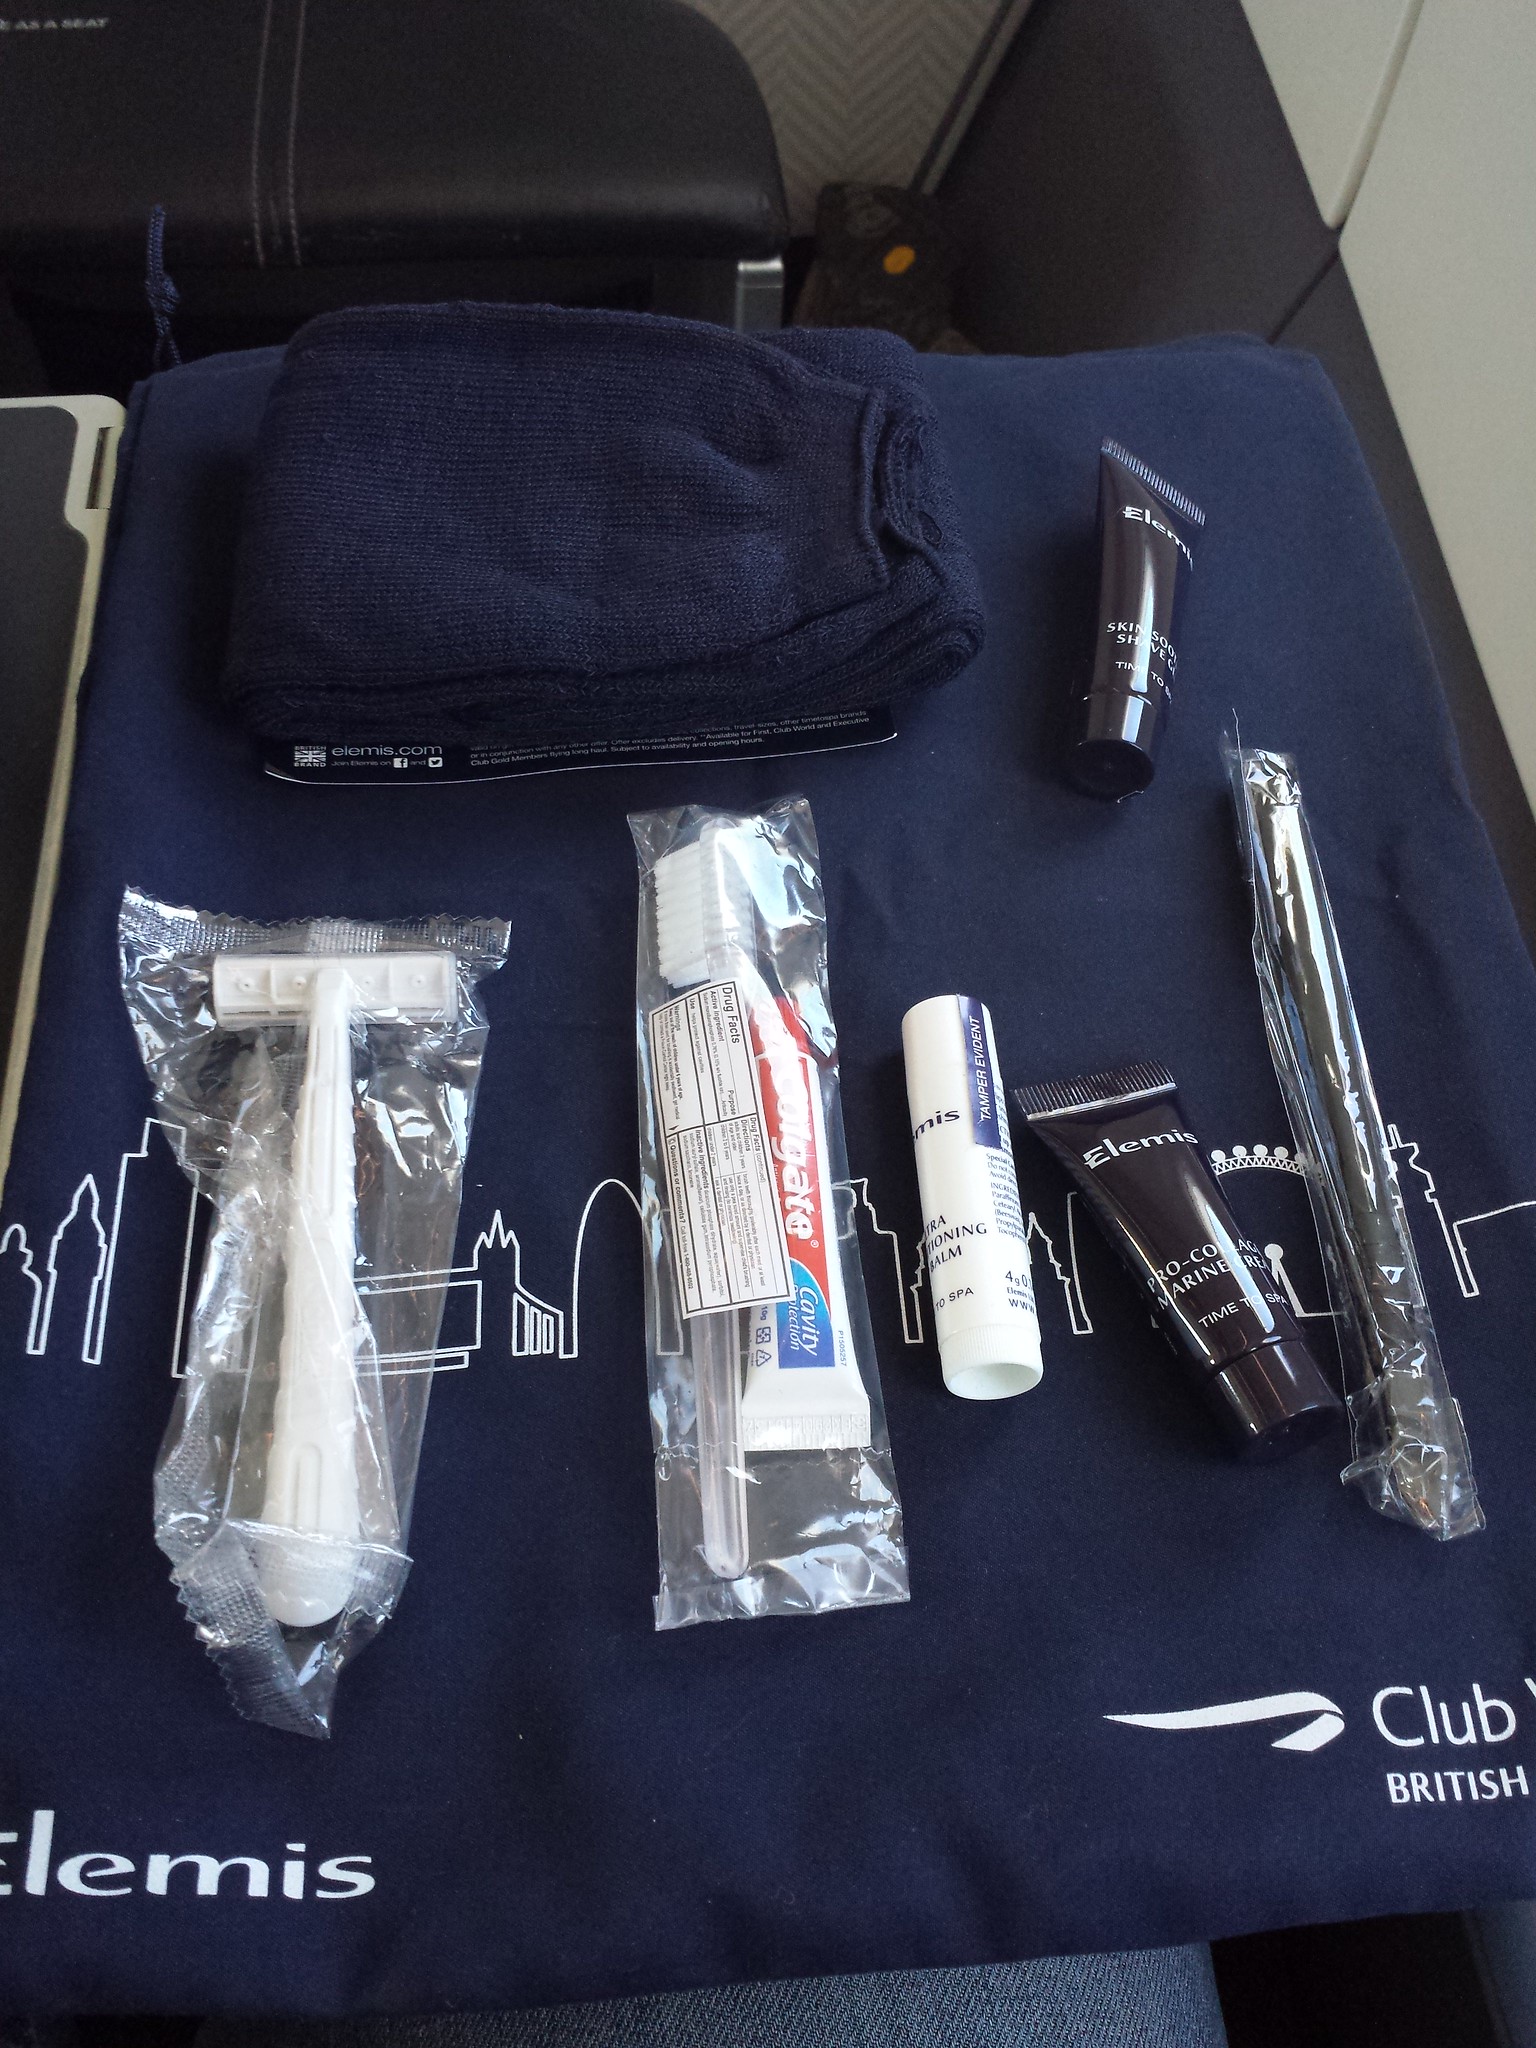 The contents of my vanity case on board the BA flight to New York JFK